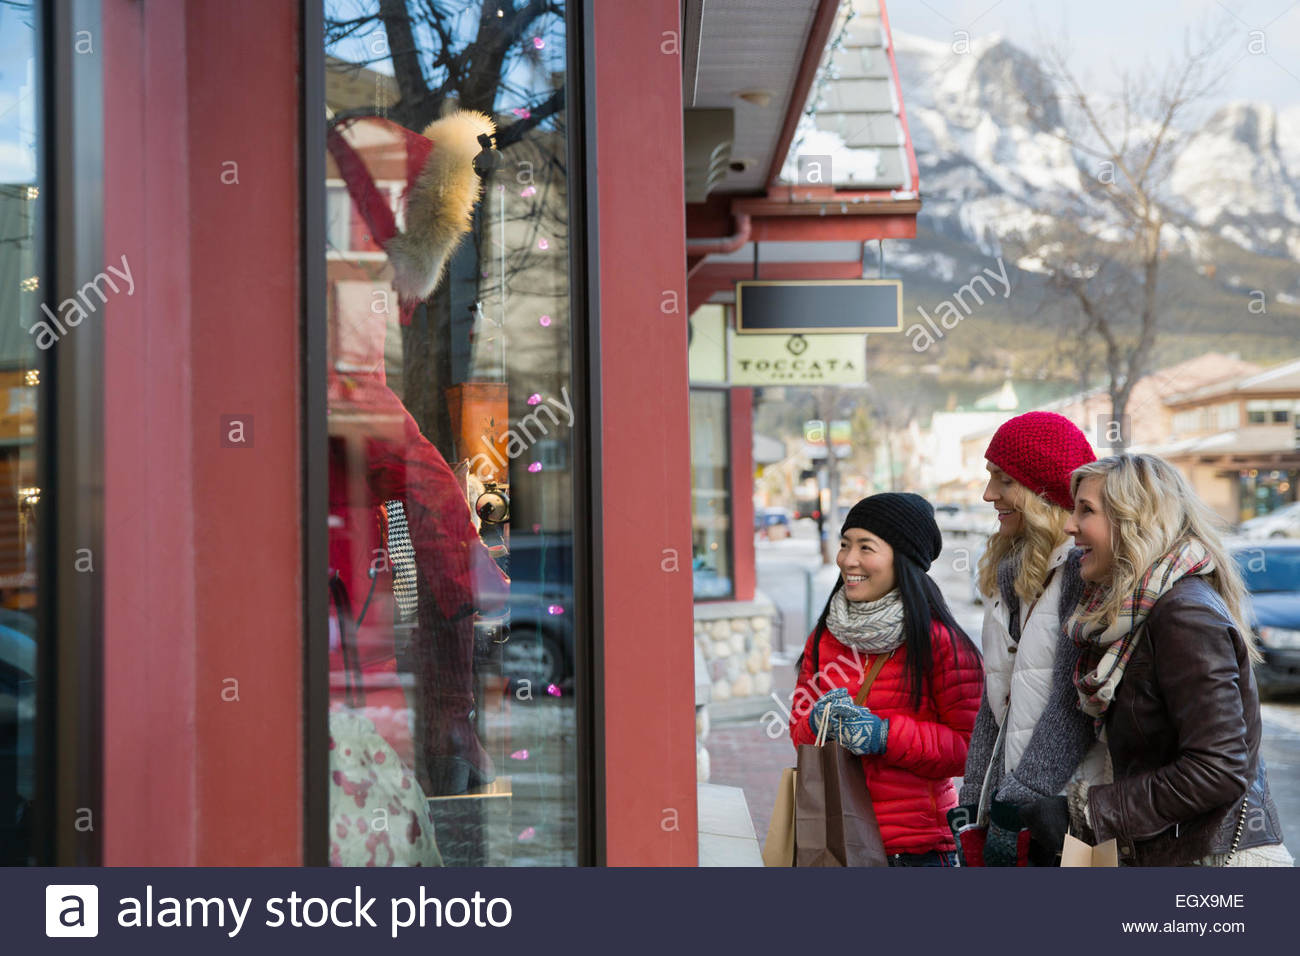 Women in warm clothing window shopping at storefront Stock Photo